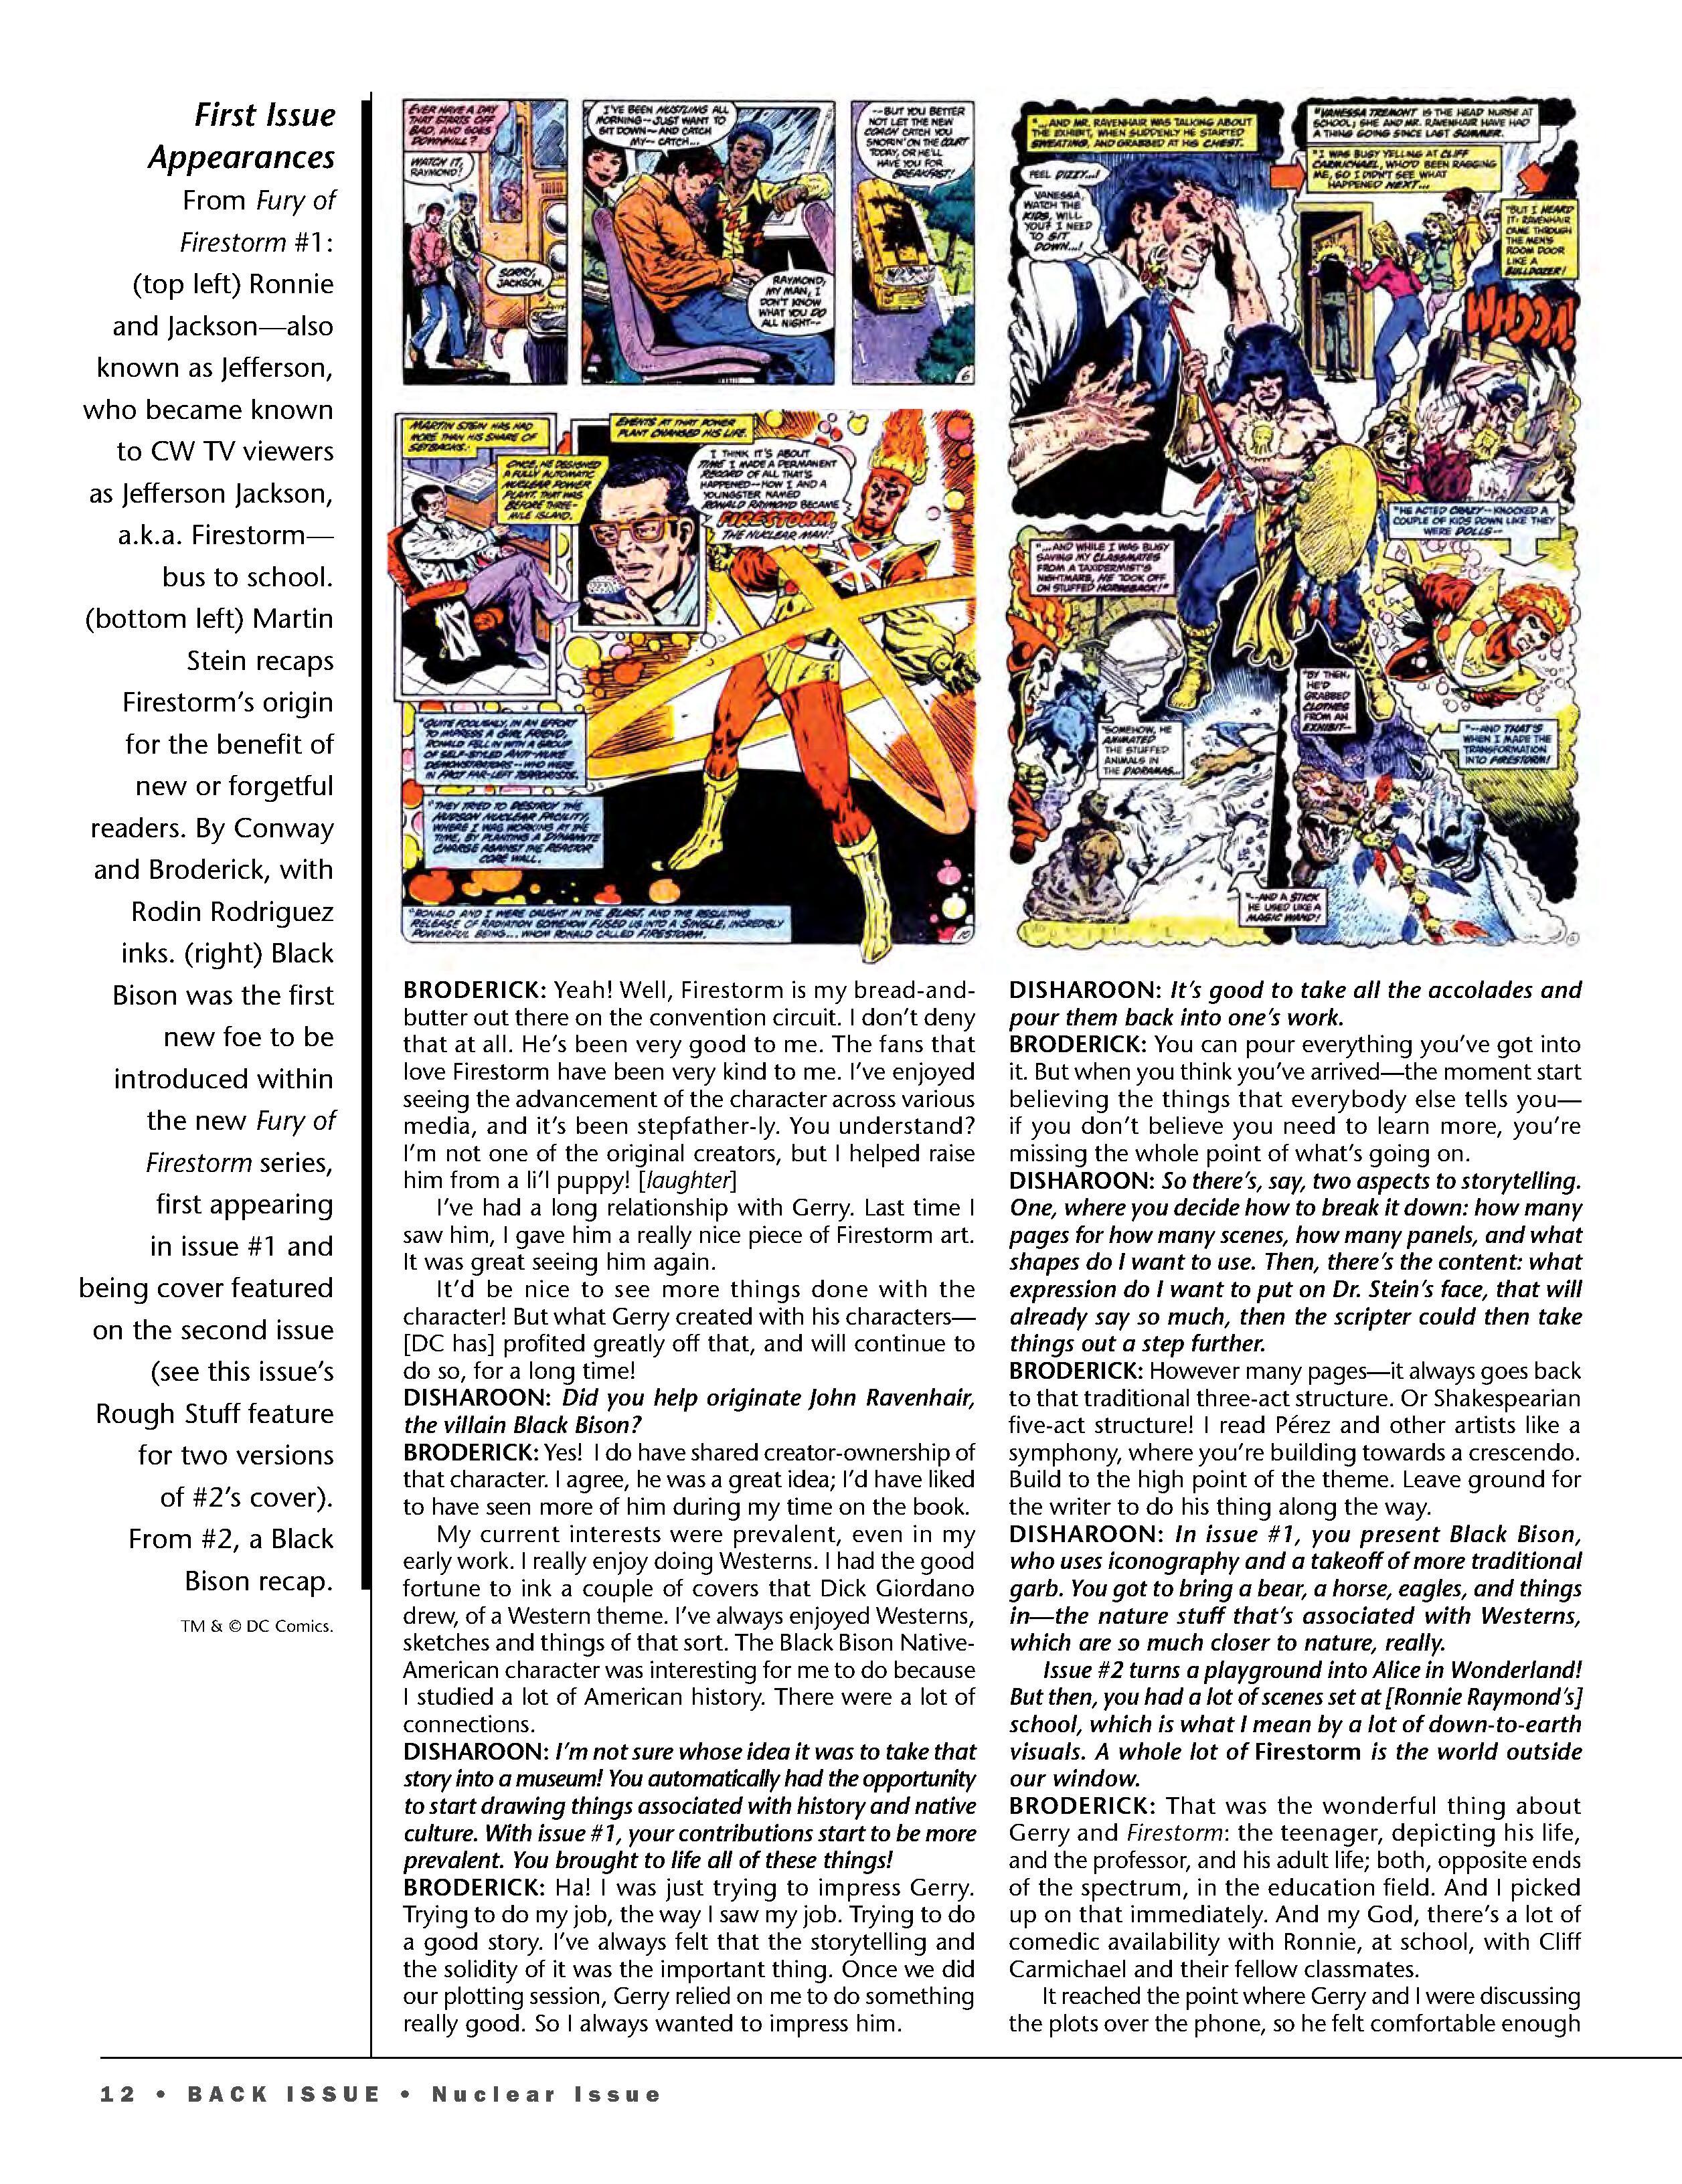 Read online Back Issue comic -  Issue #112 - 14